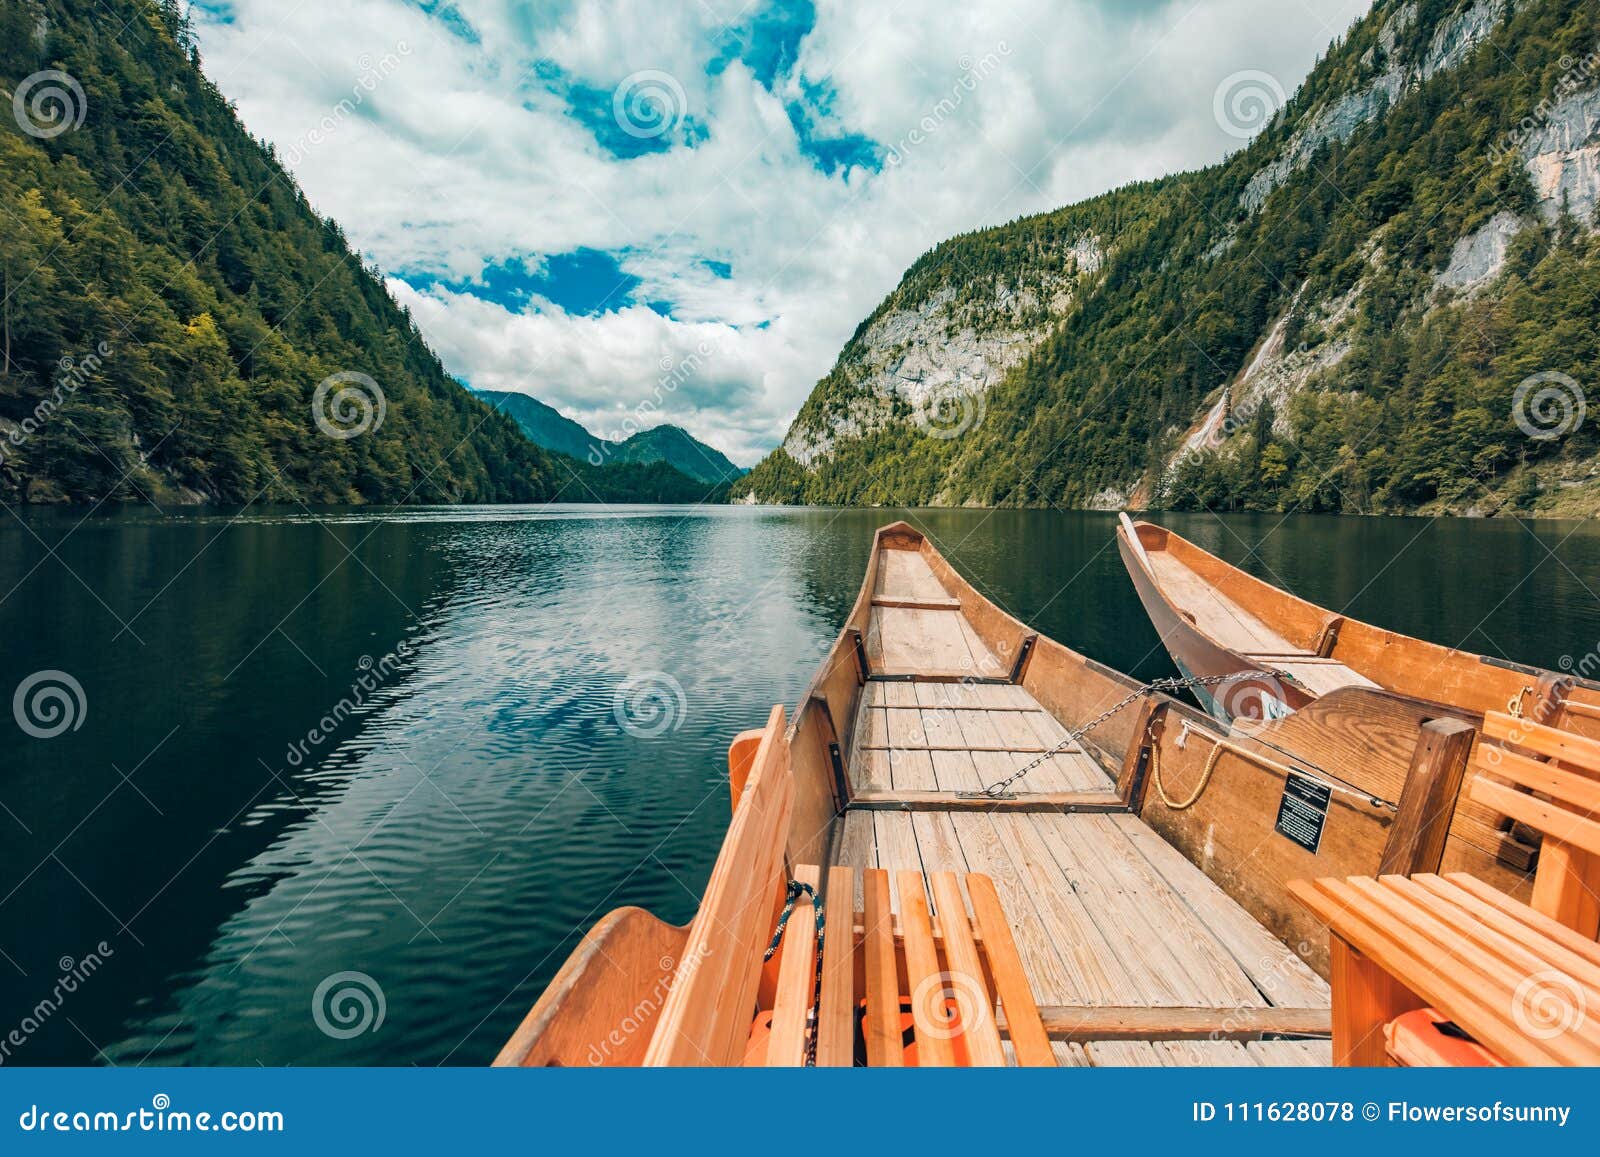 Wooden Boat On Mountain Lake Nature In The Mountains Stock Photo